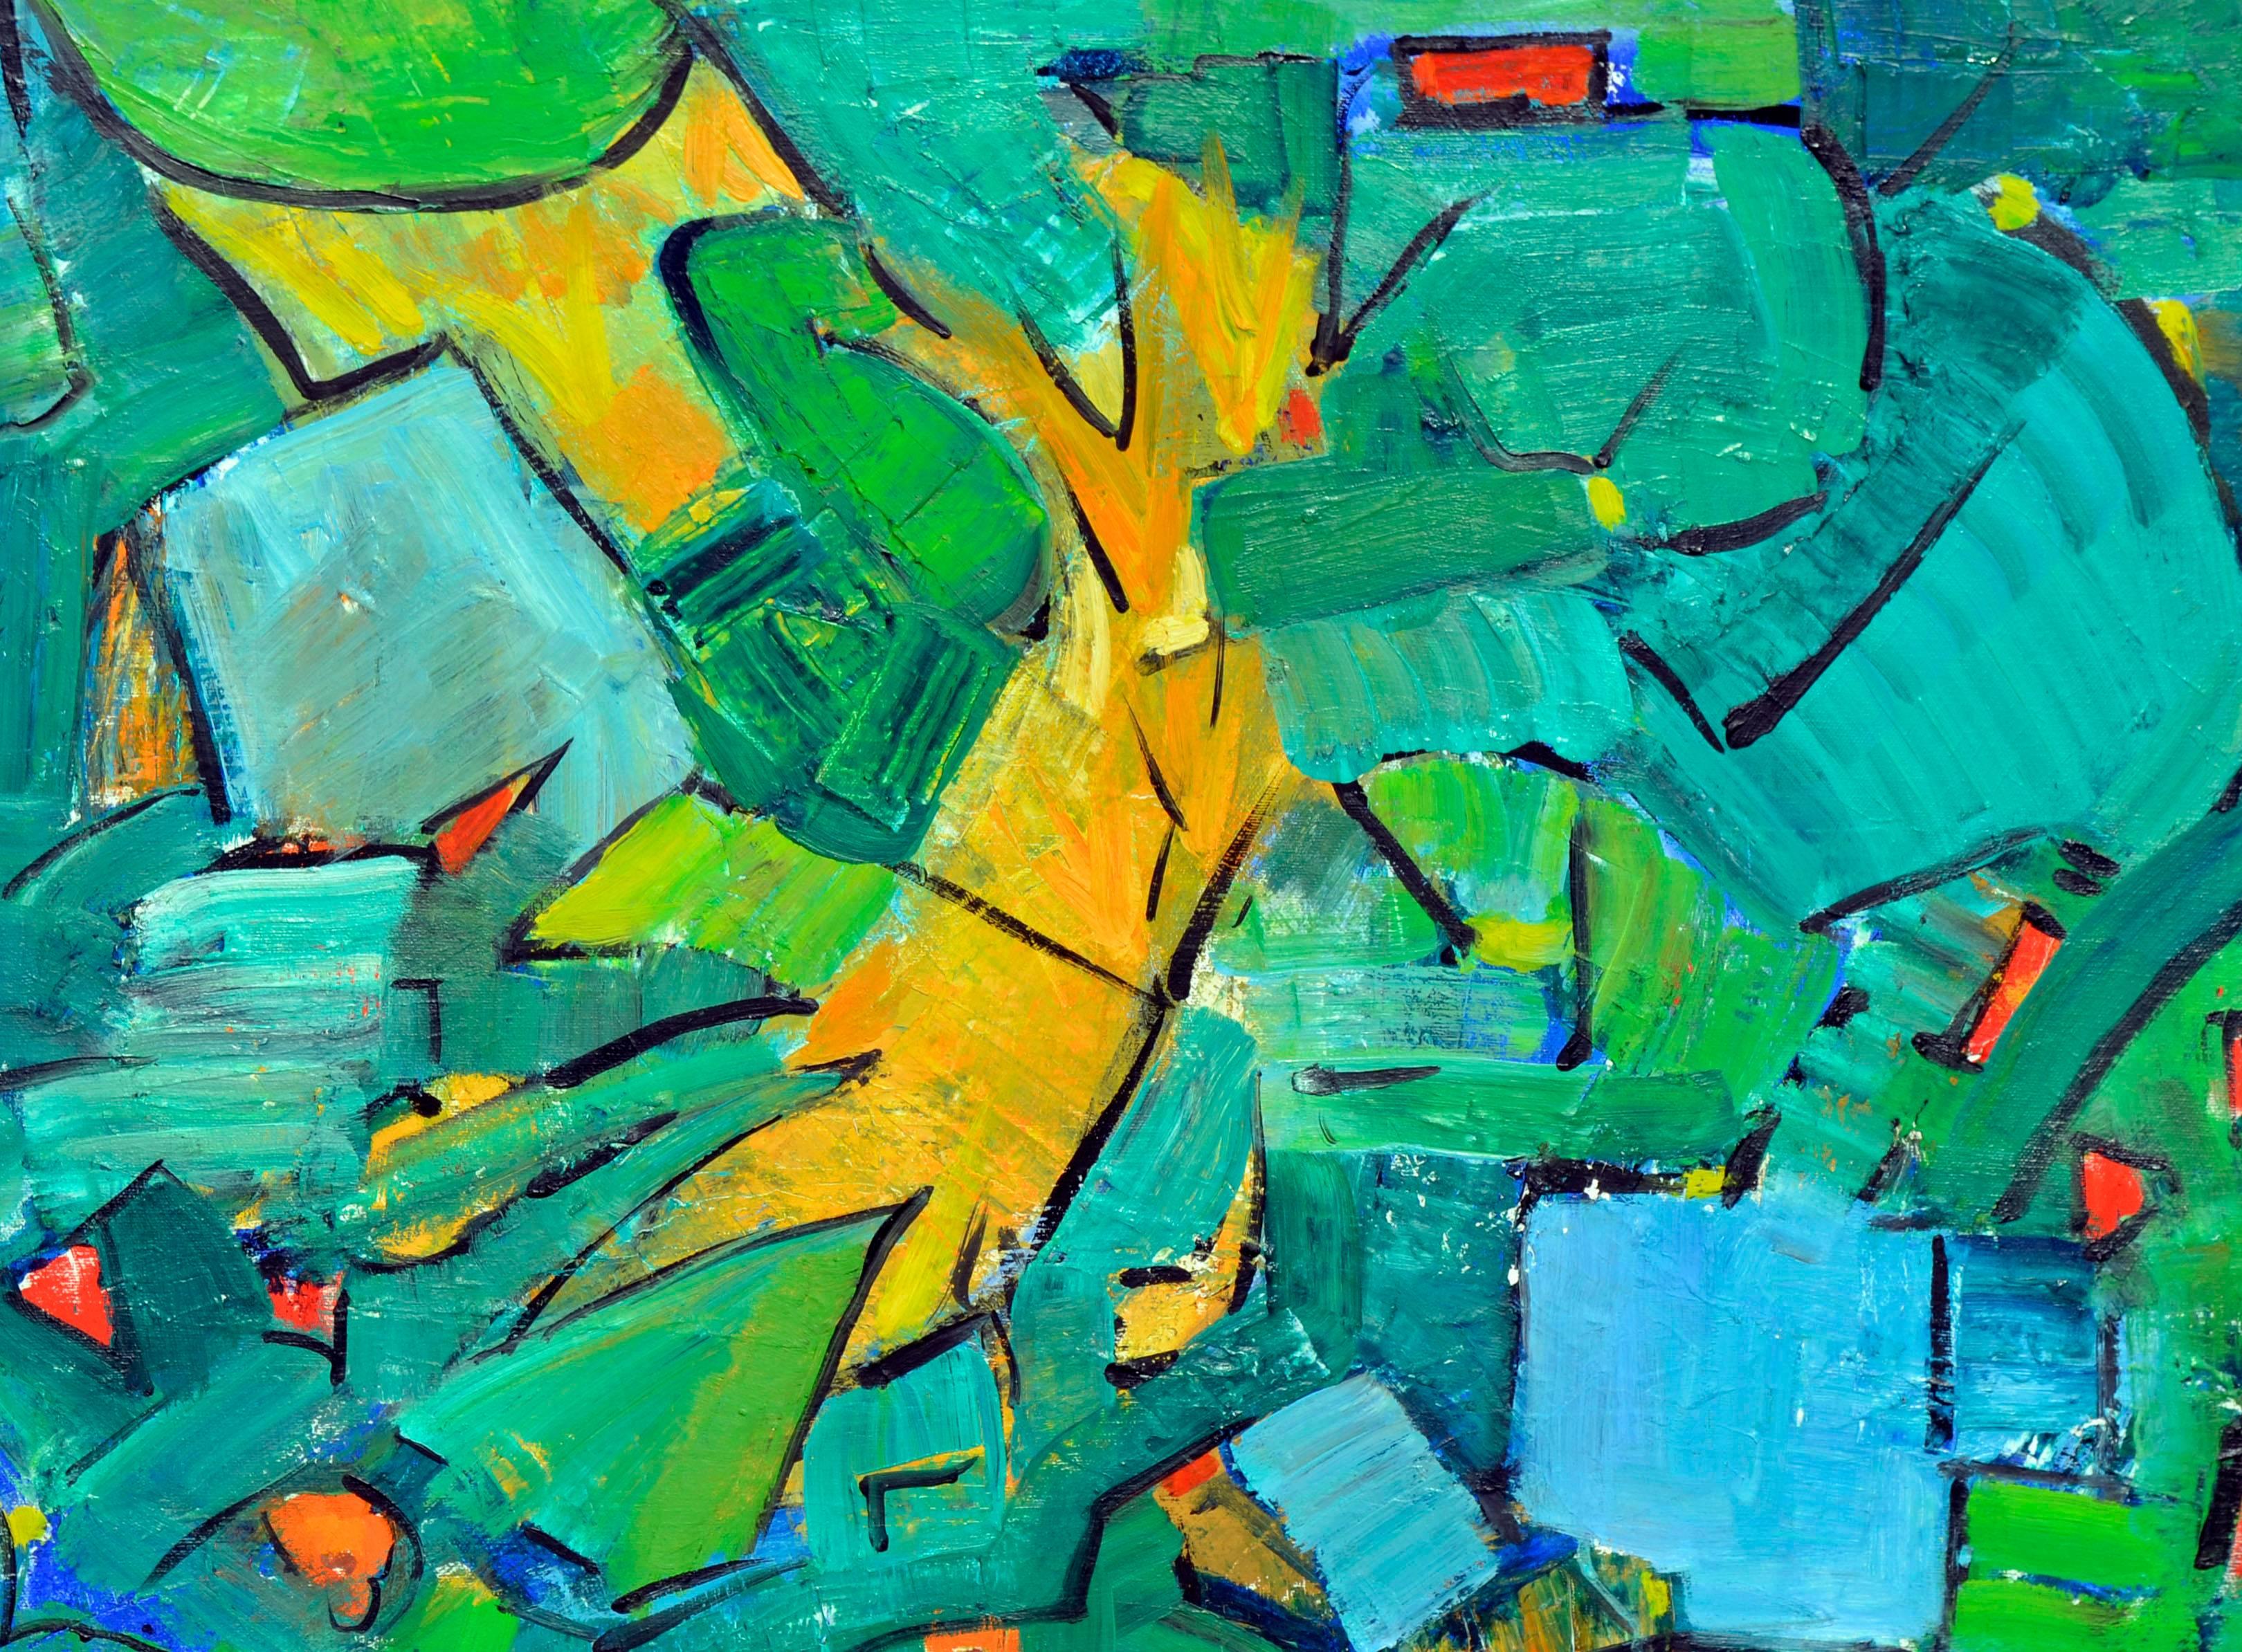 Garden Green & Cyan Abstract - Painting by Le Besque